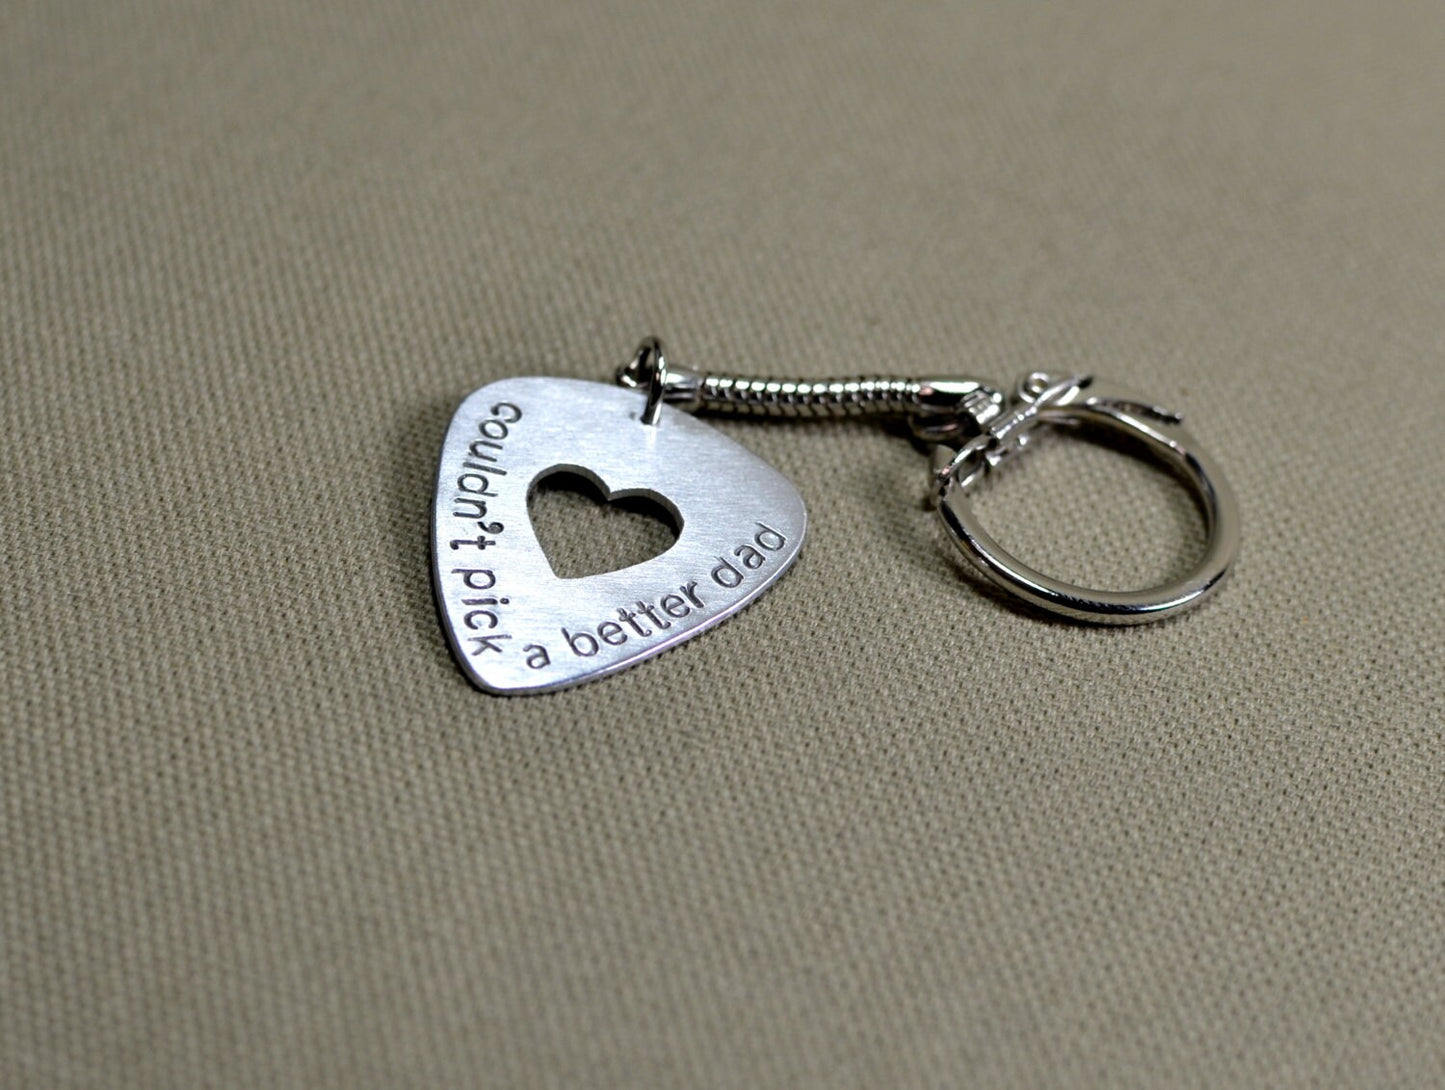 Dad sterling silver guitar pick keychain